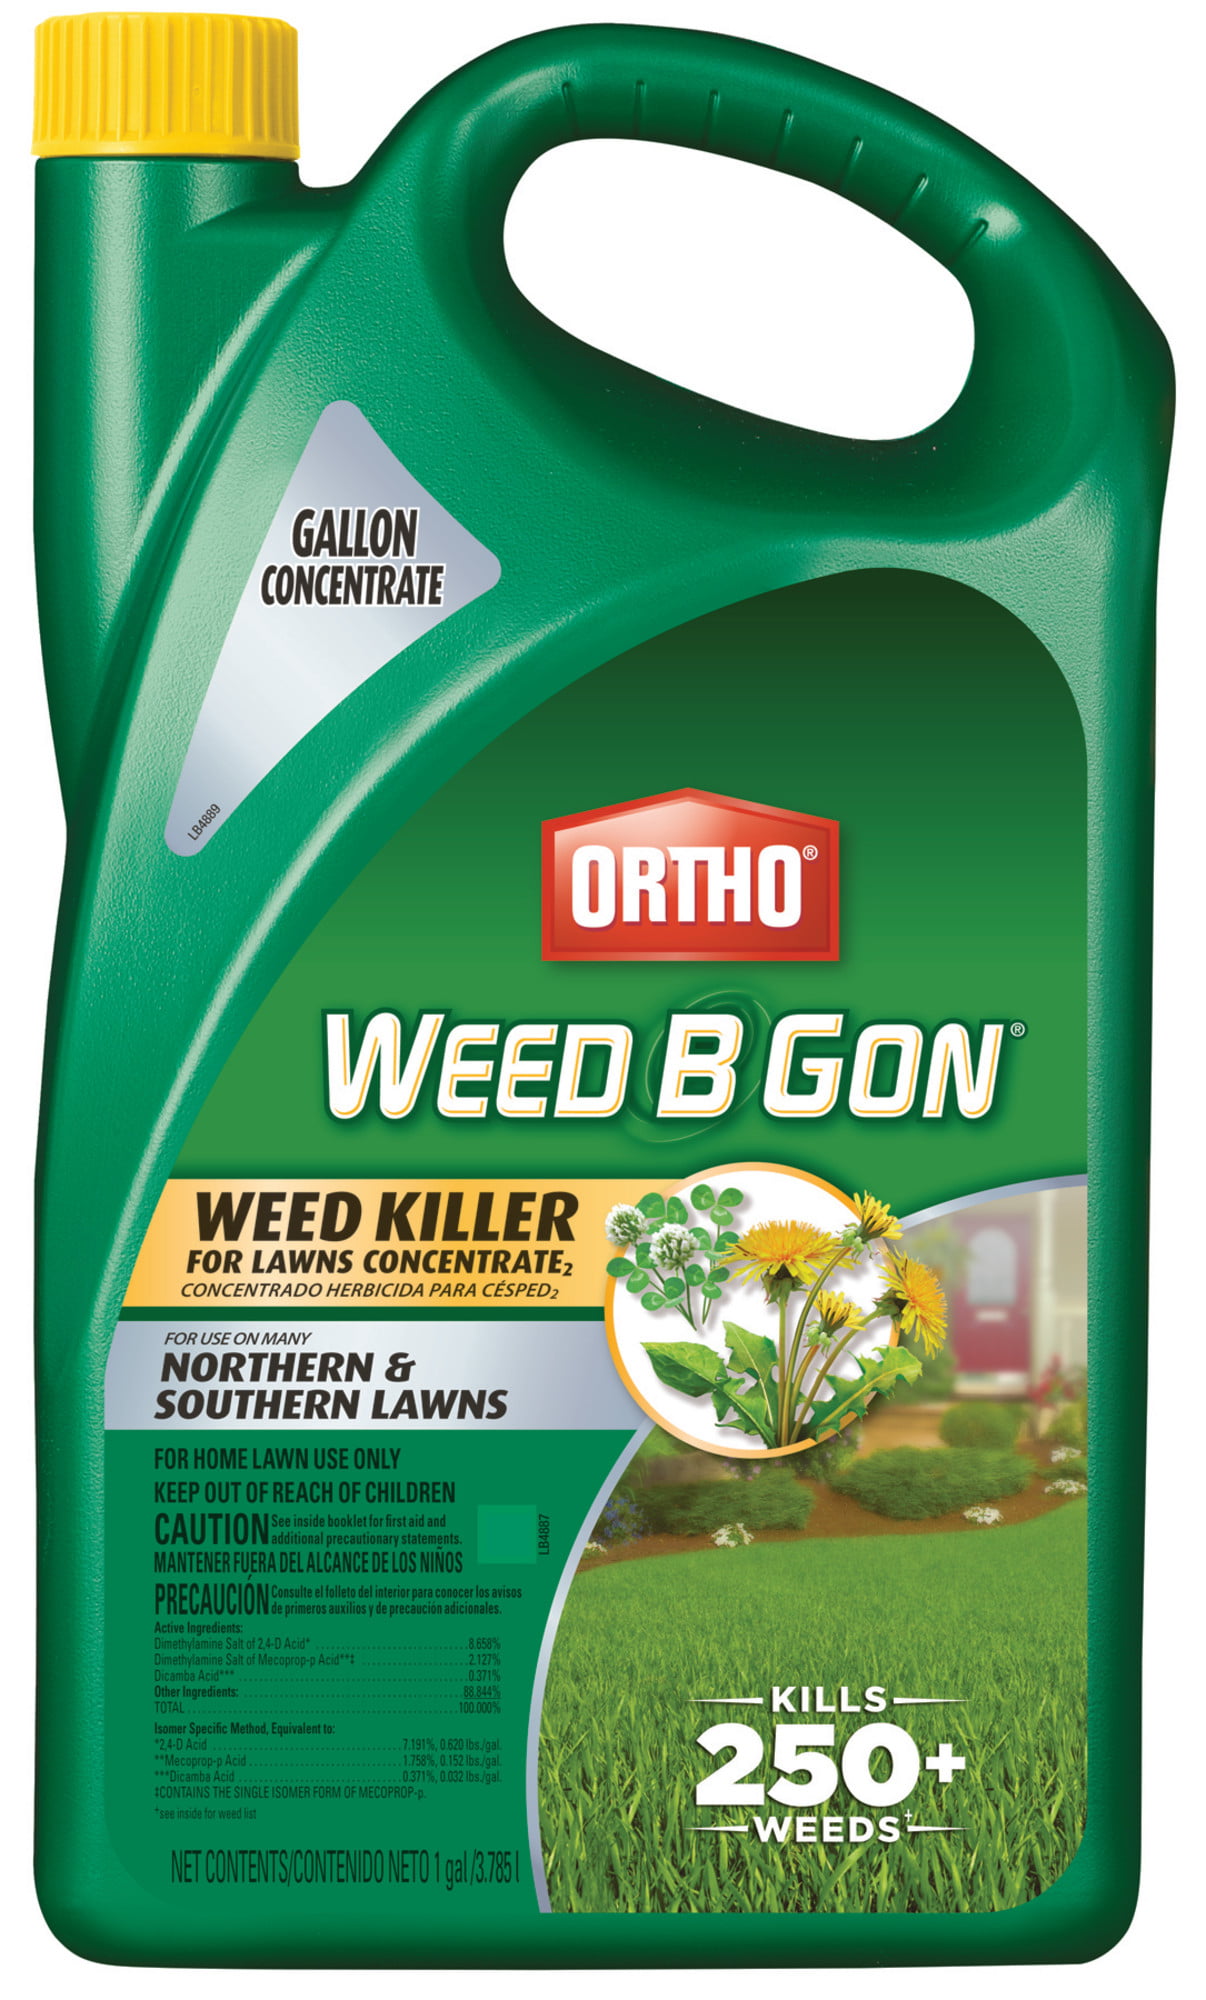 Ortho Weed B Gon Weed Killer for Lawns Concentrate2, 1 gal. - Walmart ...